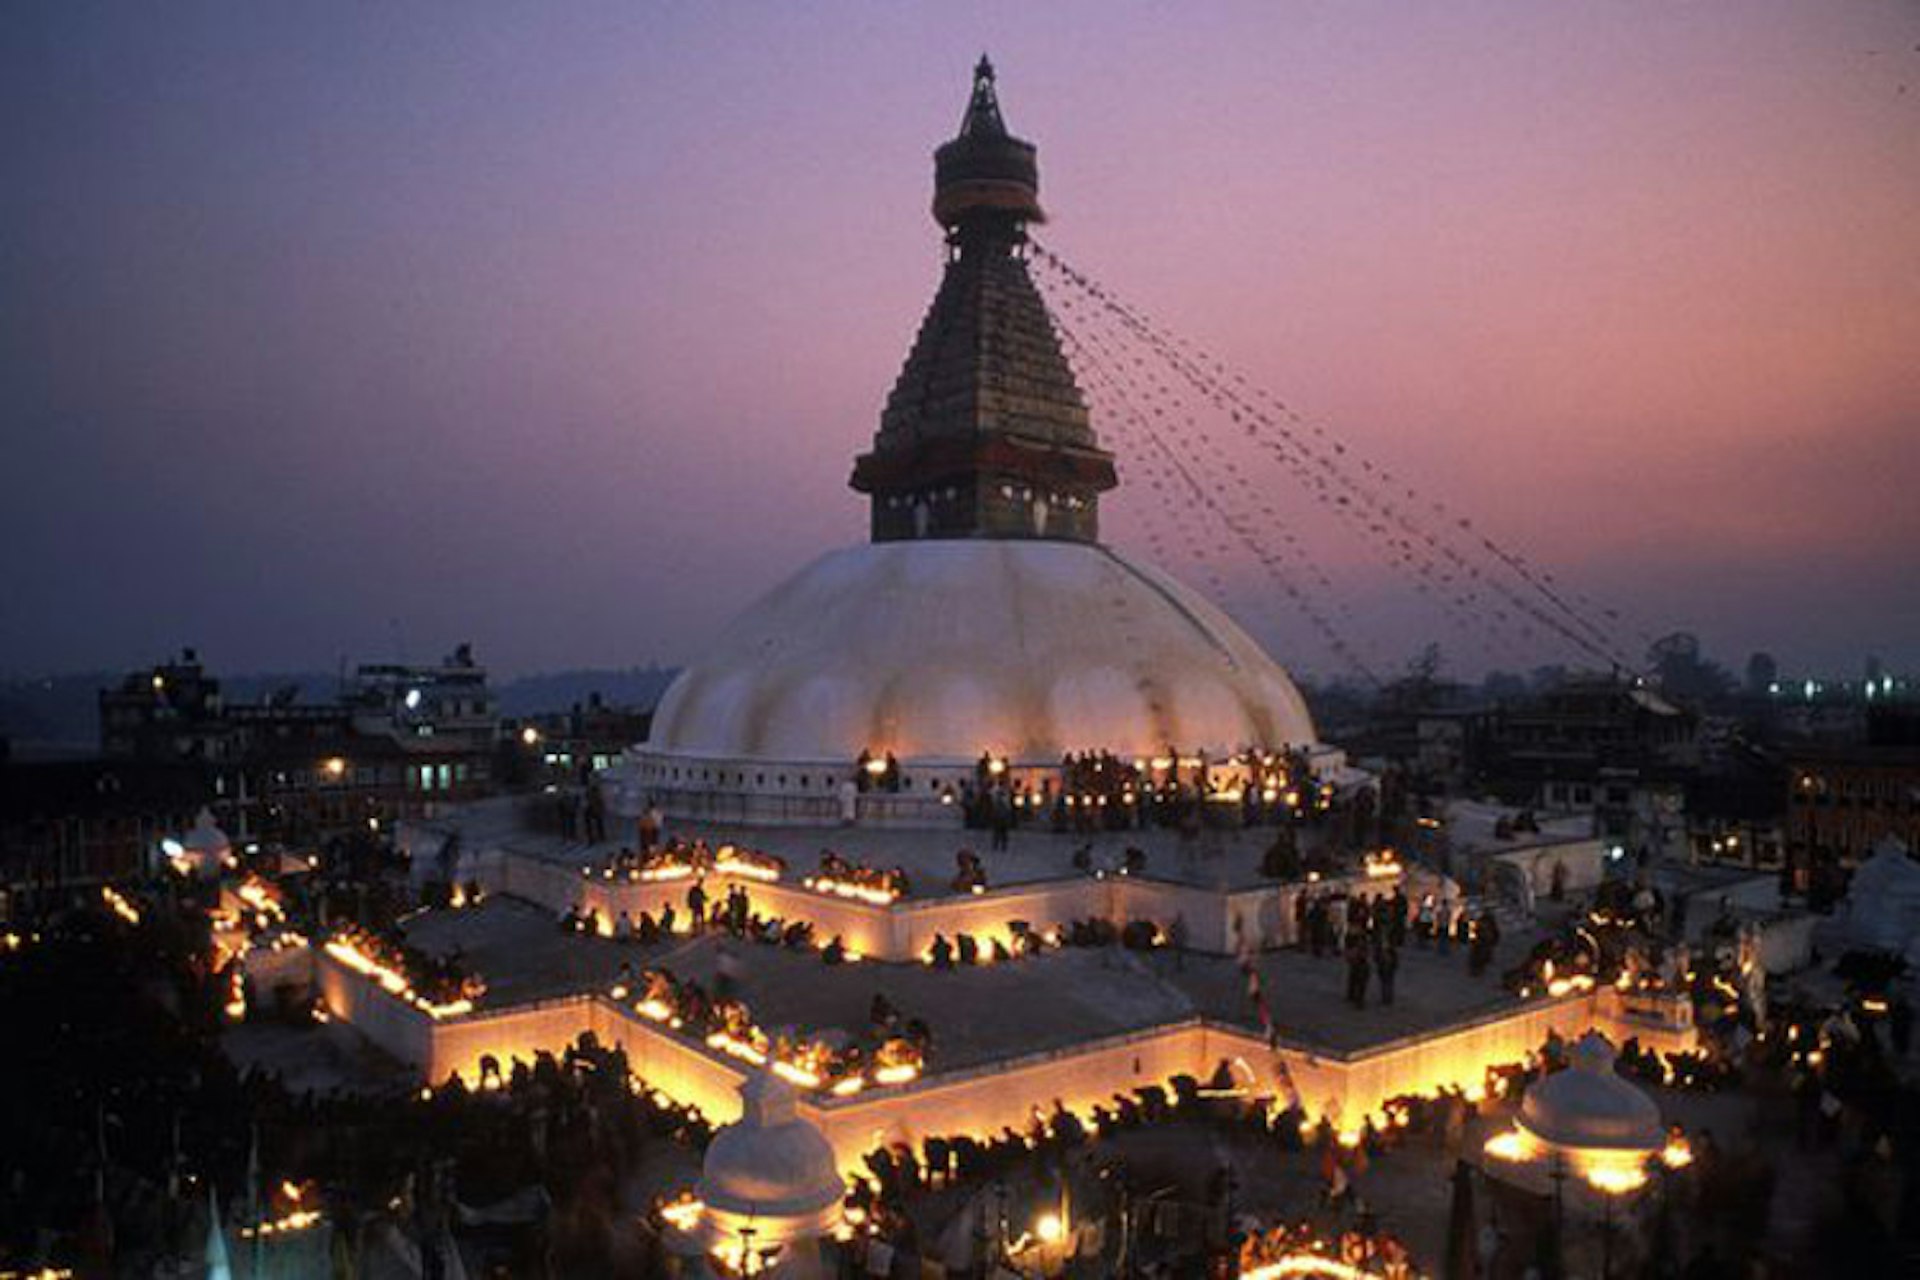 Bodhnath illuminated by butter lamps. Image by Biken2012 / CC BY-SA 2.0.